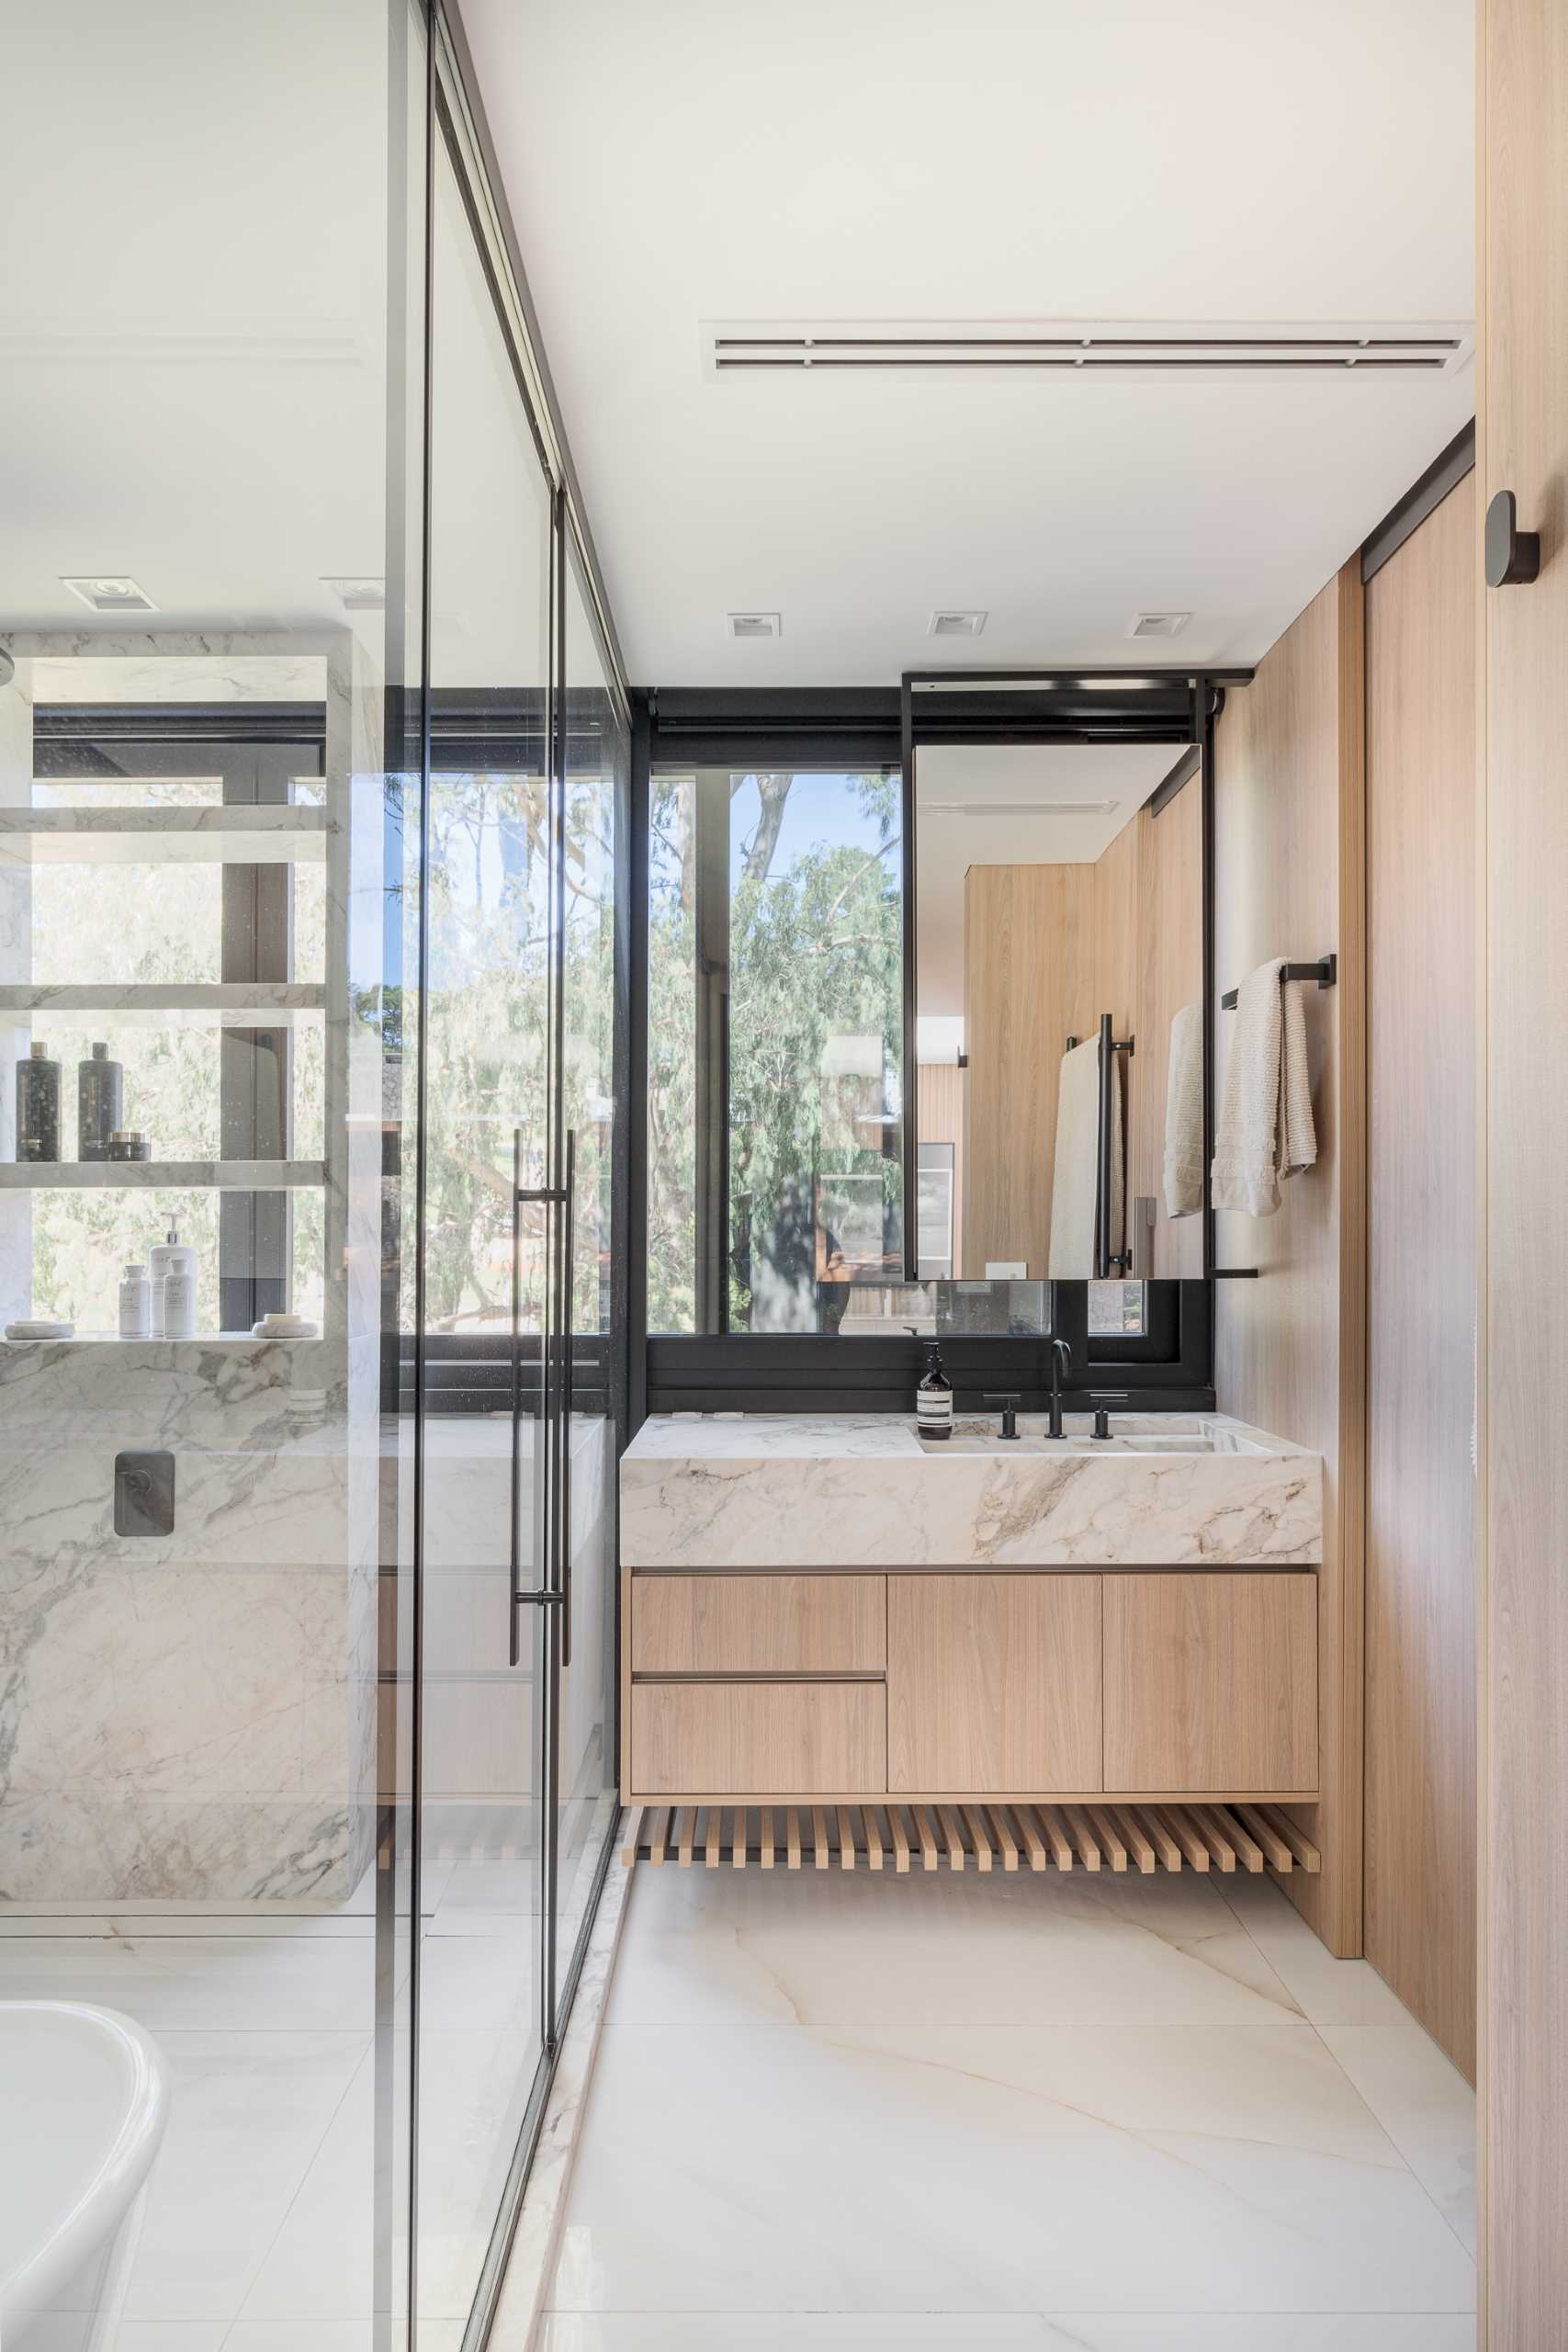 In this modern bathroom, there's a glass-enclosed wet room with a shower and freestanding bathroom, while the vanity area looks out to the treetops.